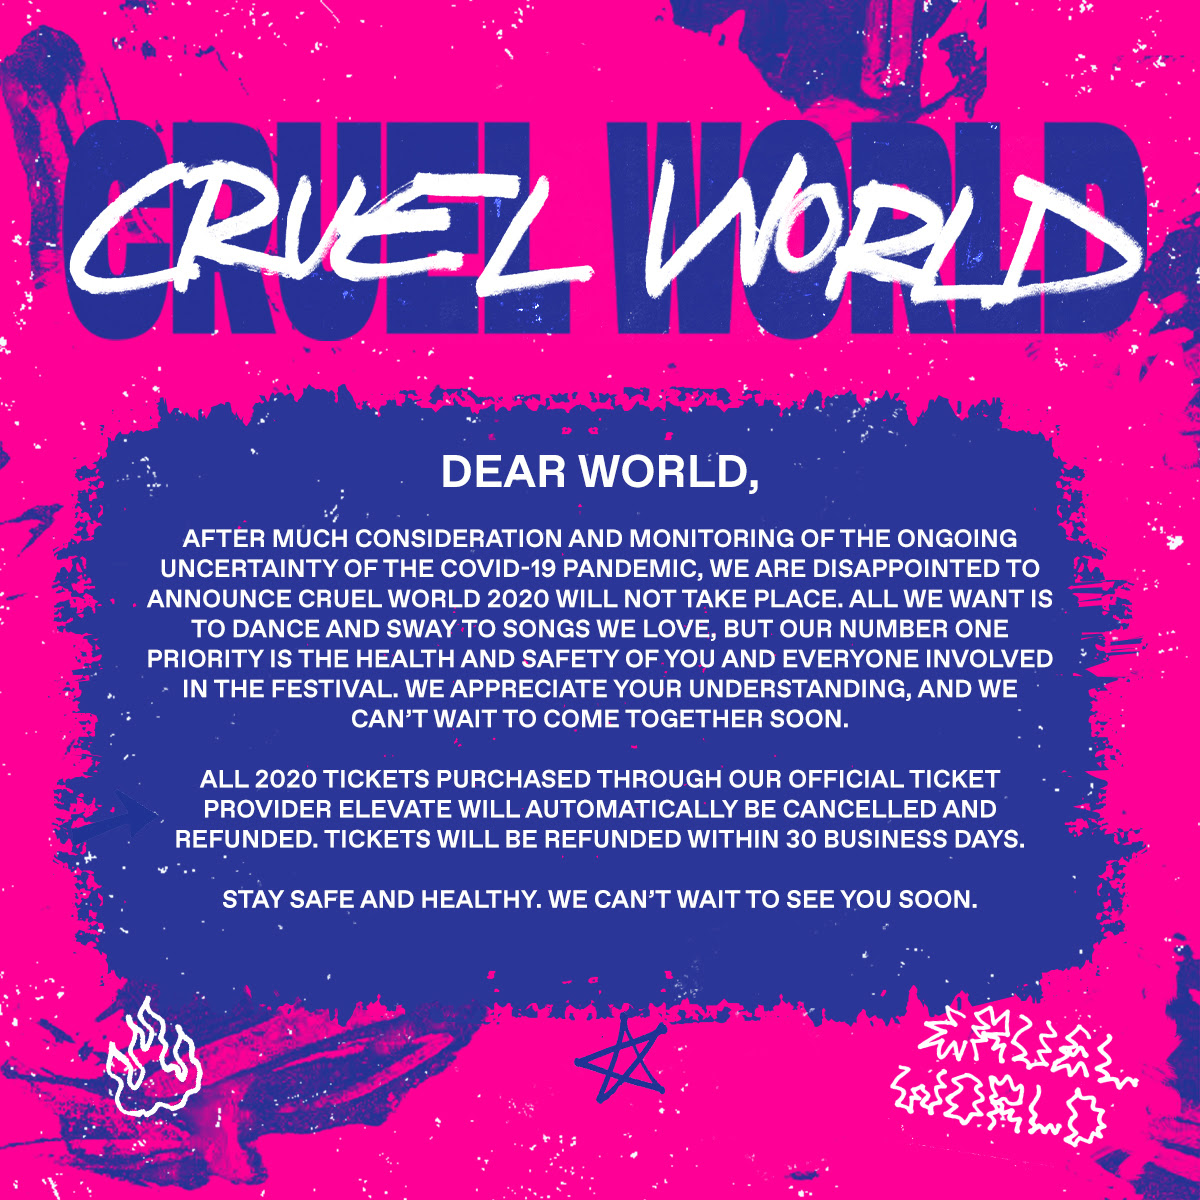 Cruel World Festival Featuring Bauhaus, Morrissey and More Cancelled